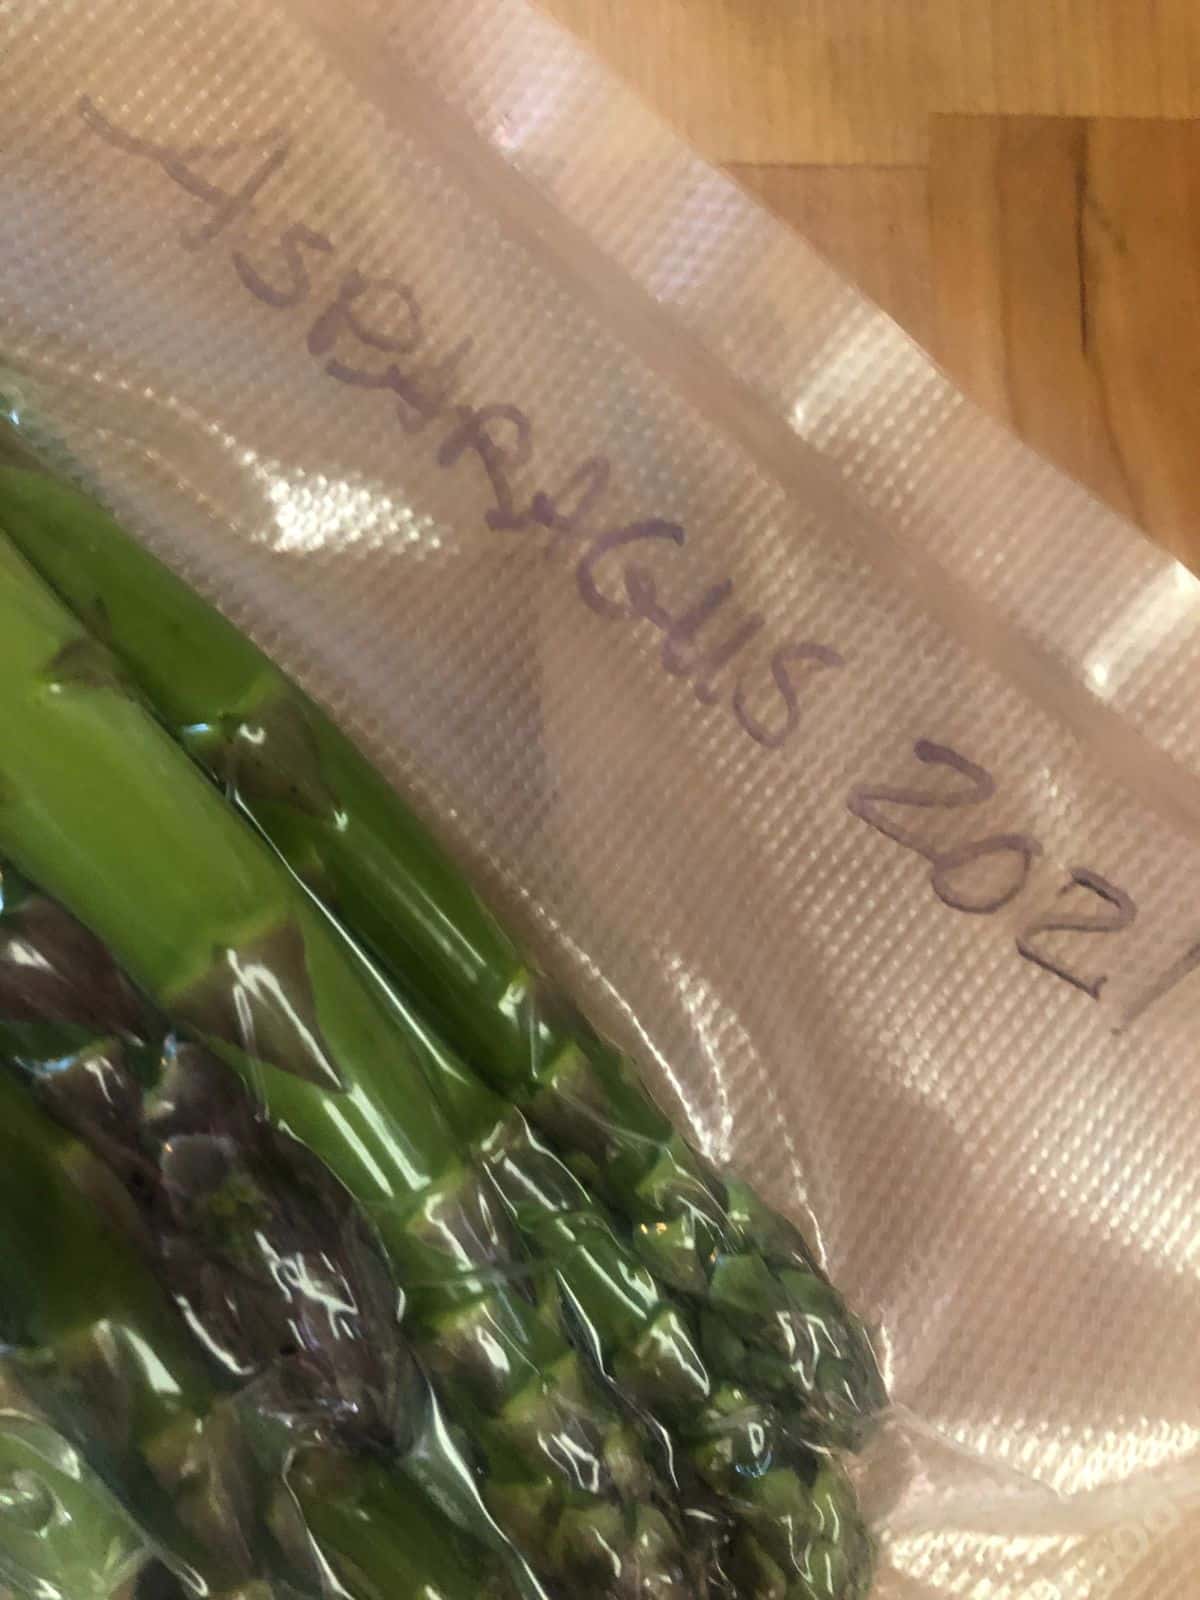 Asparagus in a bag for freezing